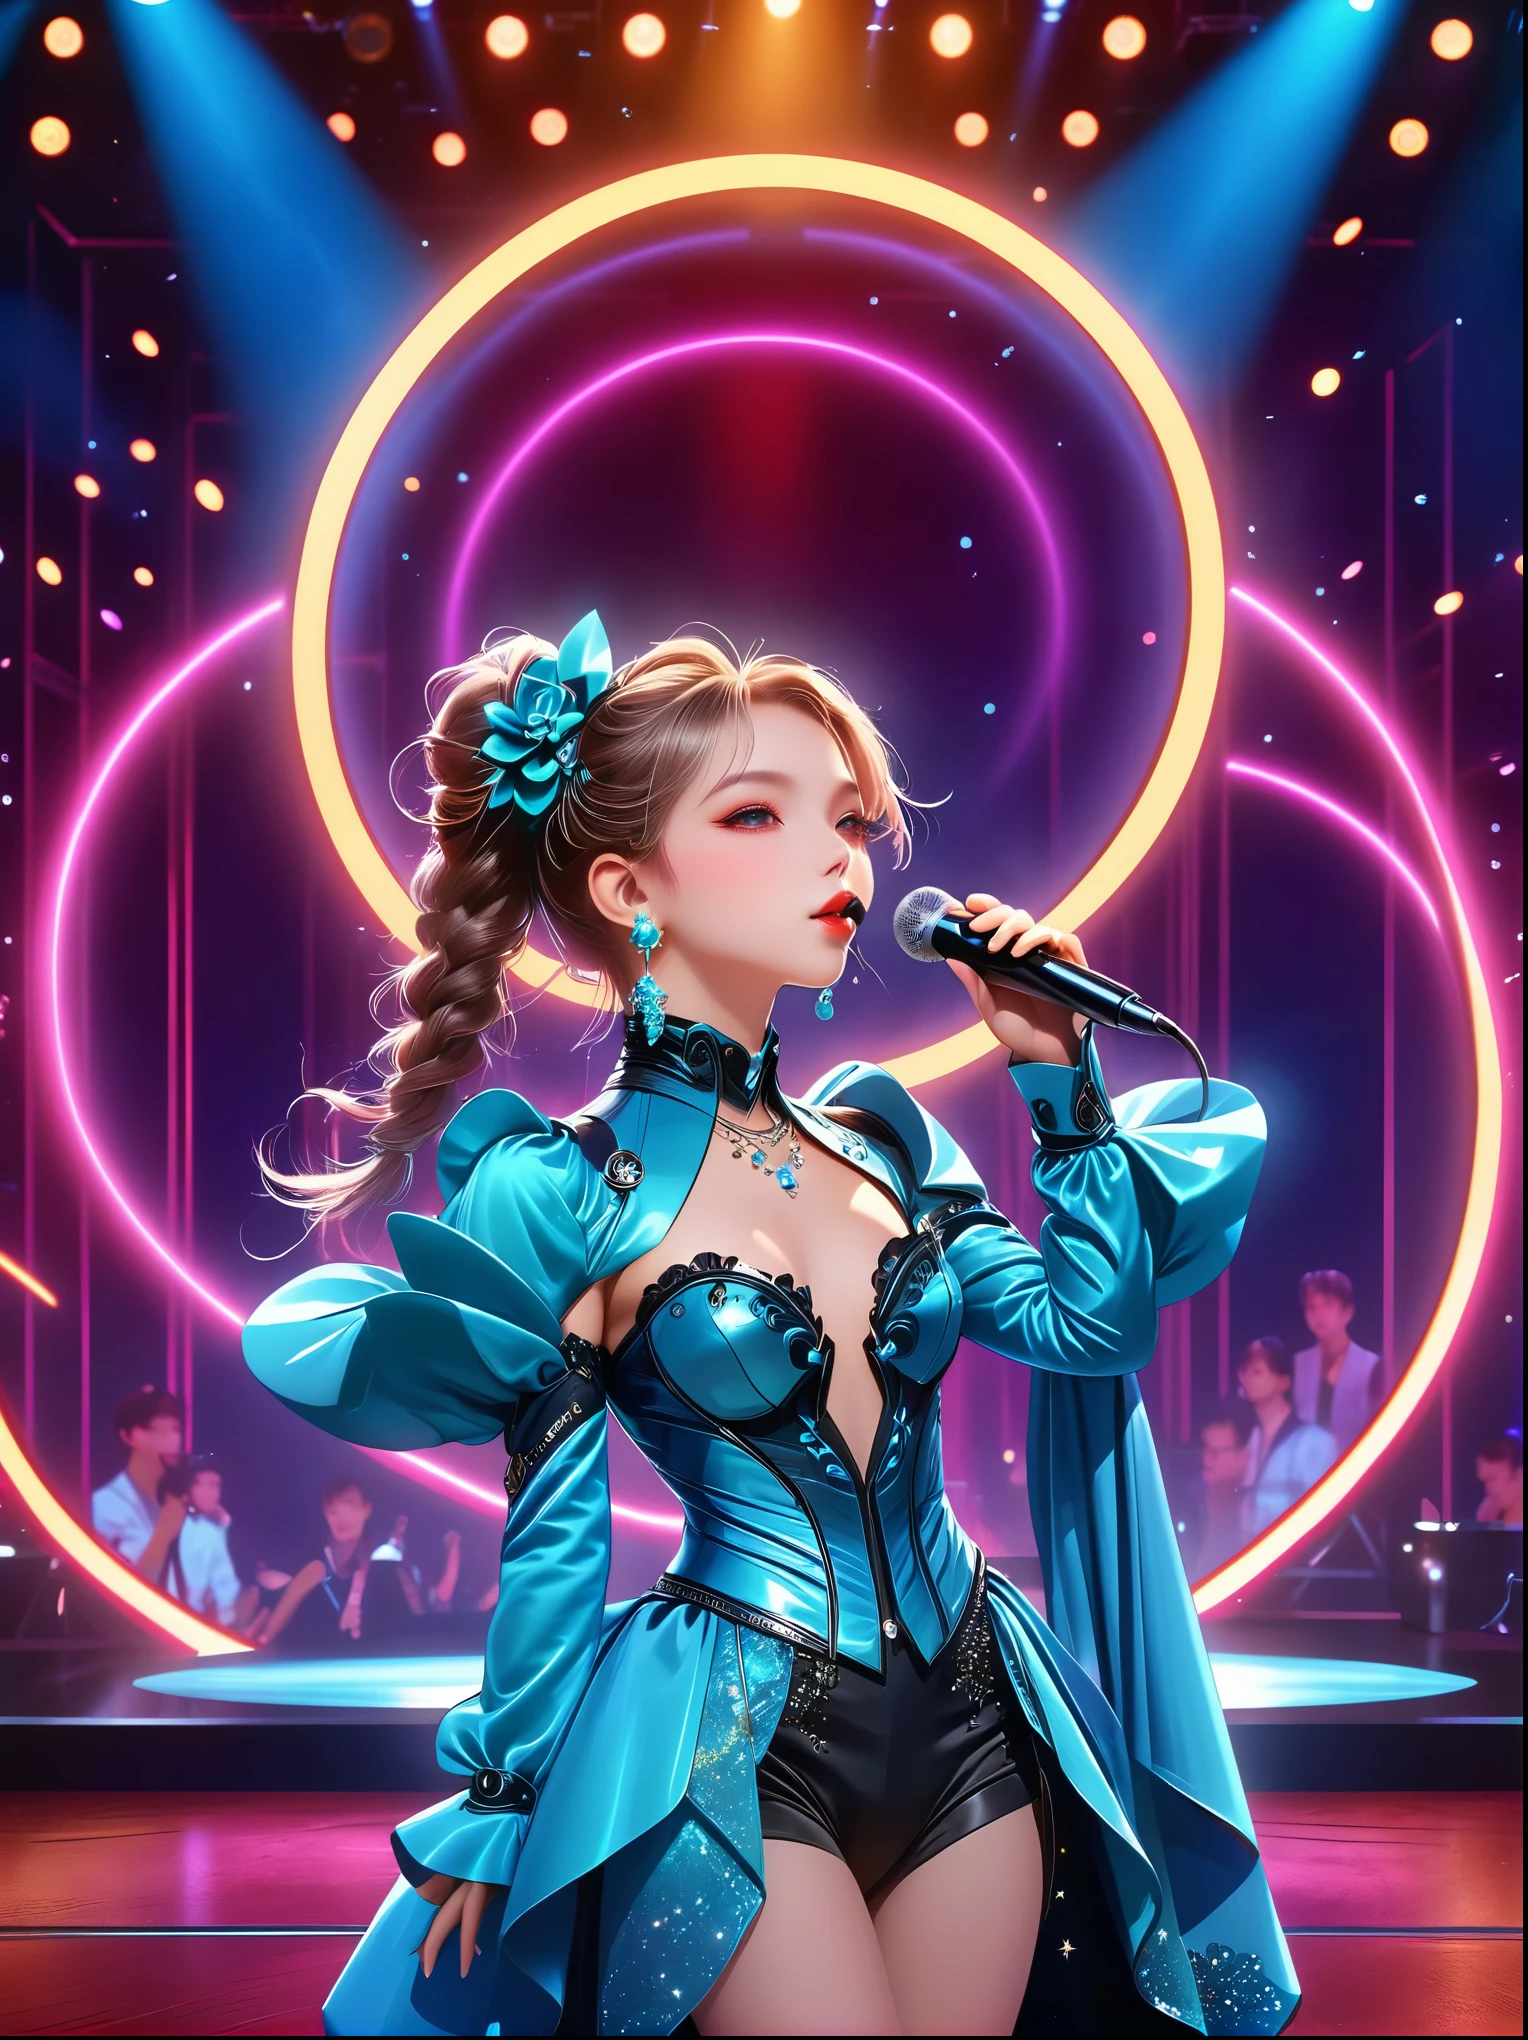 (Vision:1.8)，1girl, concert，(audience:1.5), (Idol stage:1.5)，1 beautiful young female idol, Wearing futuristic costumes, (((microphone)))，(Singing on the Idol stage:1.6), futuristic stage, (complex stage design:1.3), (Mechanical stage elements:1.5), Dreamy atmosphere, Starry sky background, (lunar backdrop:1.5), shining lights, Neon embellished, The stage is filled with smoke，Lights focus on people，It creates a mysterious and charming atmosphere，Even more attractive against the shadow background，Laser shows and moving stage effects complement the pulsating neon lights，Create a vibrant performance atmosphere，The stage floor is gleaming，The crowd was enthusiastic，Warm atmosphere，Eye-catching stage design，Full of technology，World-class production standards，Bringing a modern entertainment experience，Music and images blend perfectly，Demonstrating artistic expression and musical talent，The charming stage style makes people intoxicated，Best quality，8K, high resolution，masterpiece，Photorealistic effects，(Watching the Idol stage from a distance:1.6)，((Stage scene in telescope))